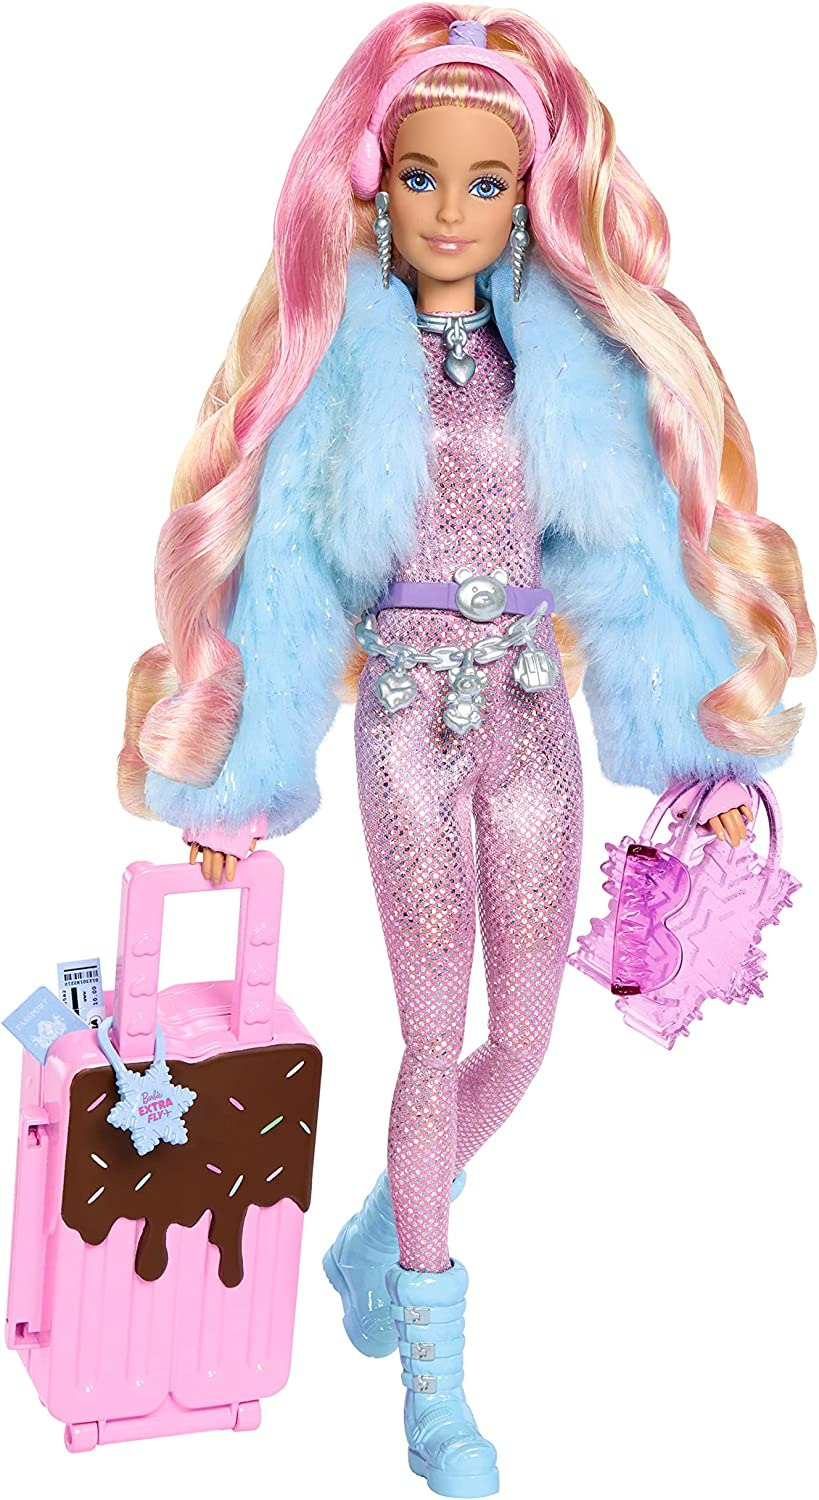 Travel Barbie Doll with Wintery Snow Fashion-1